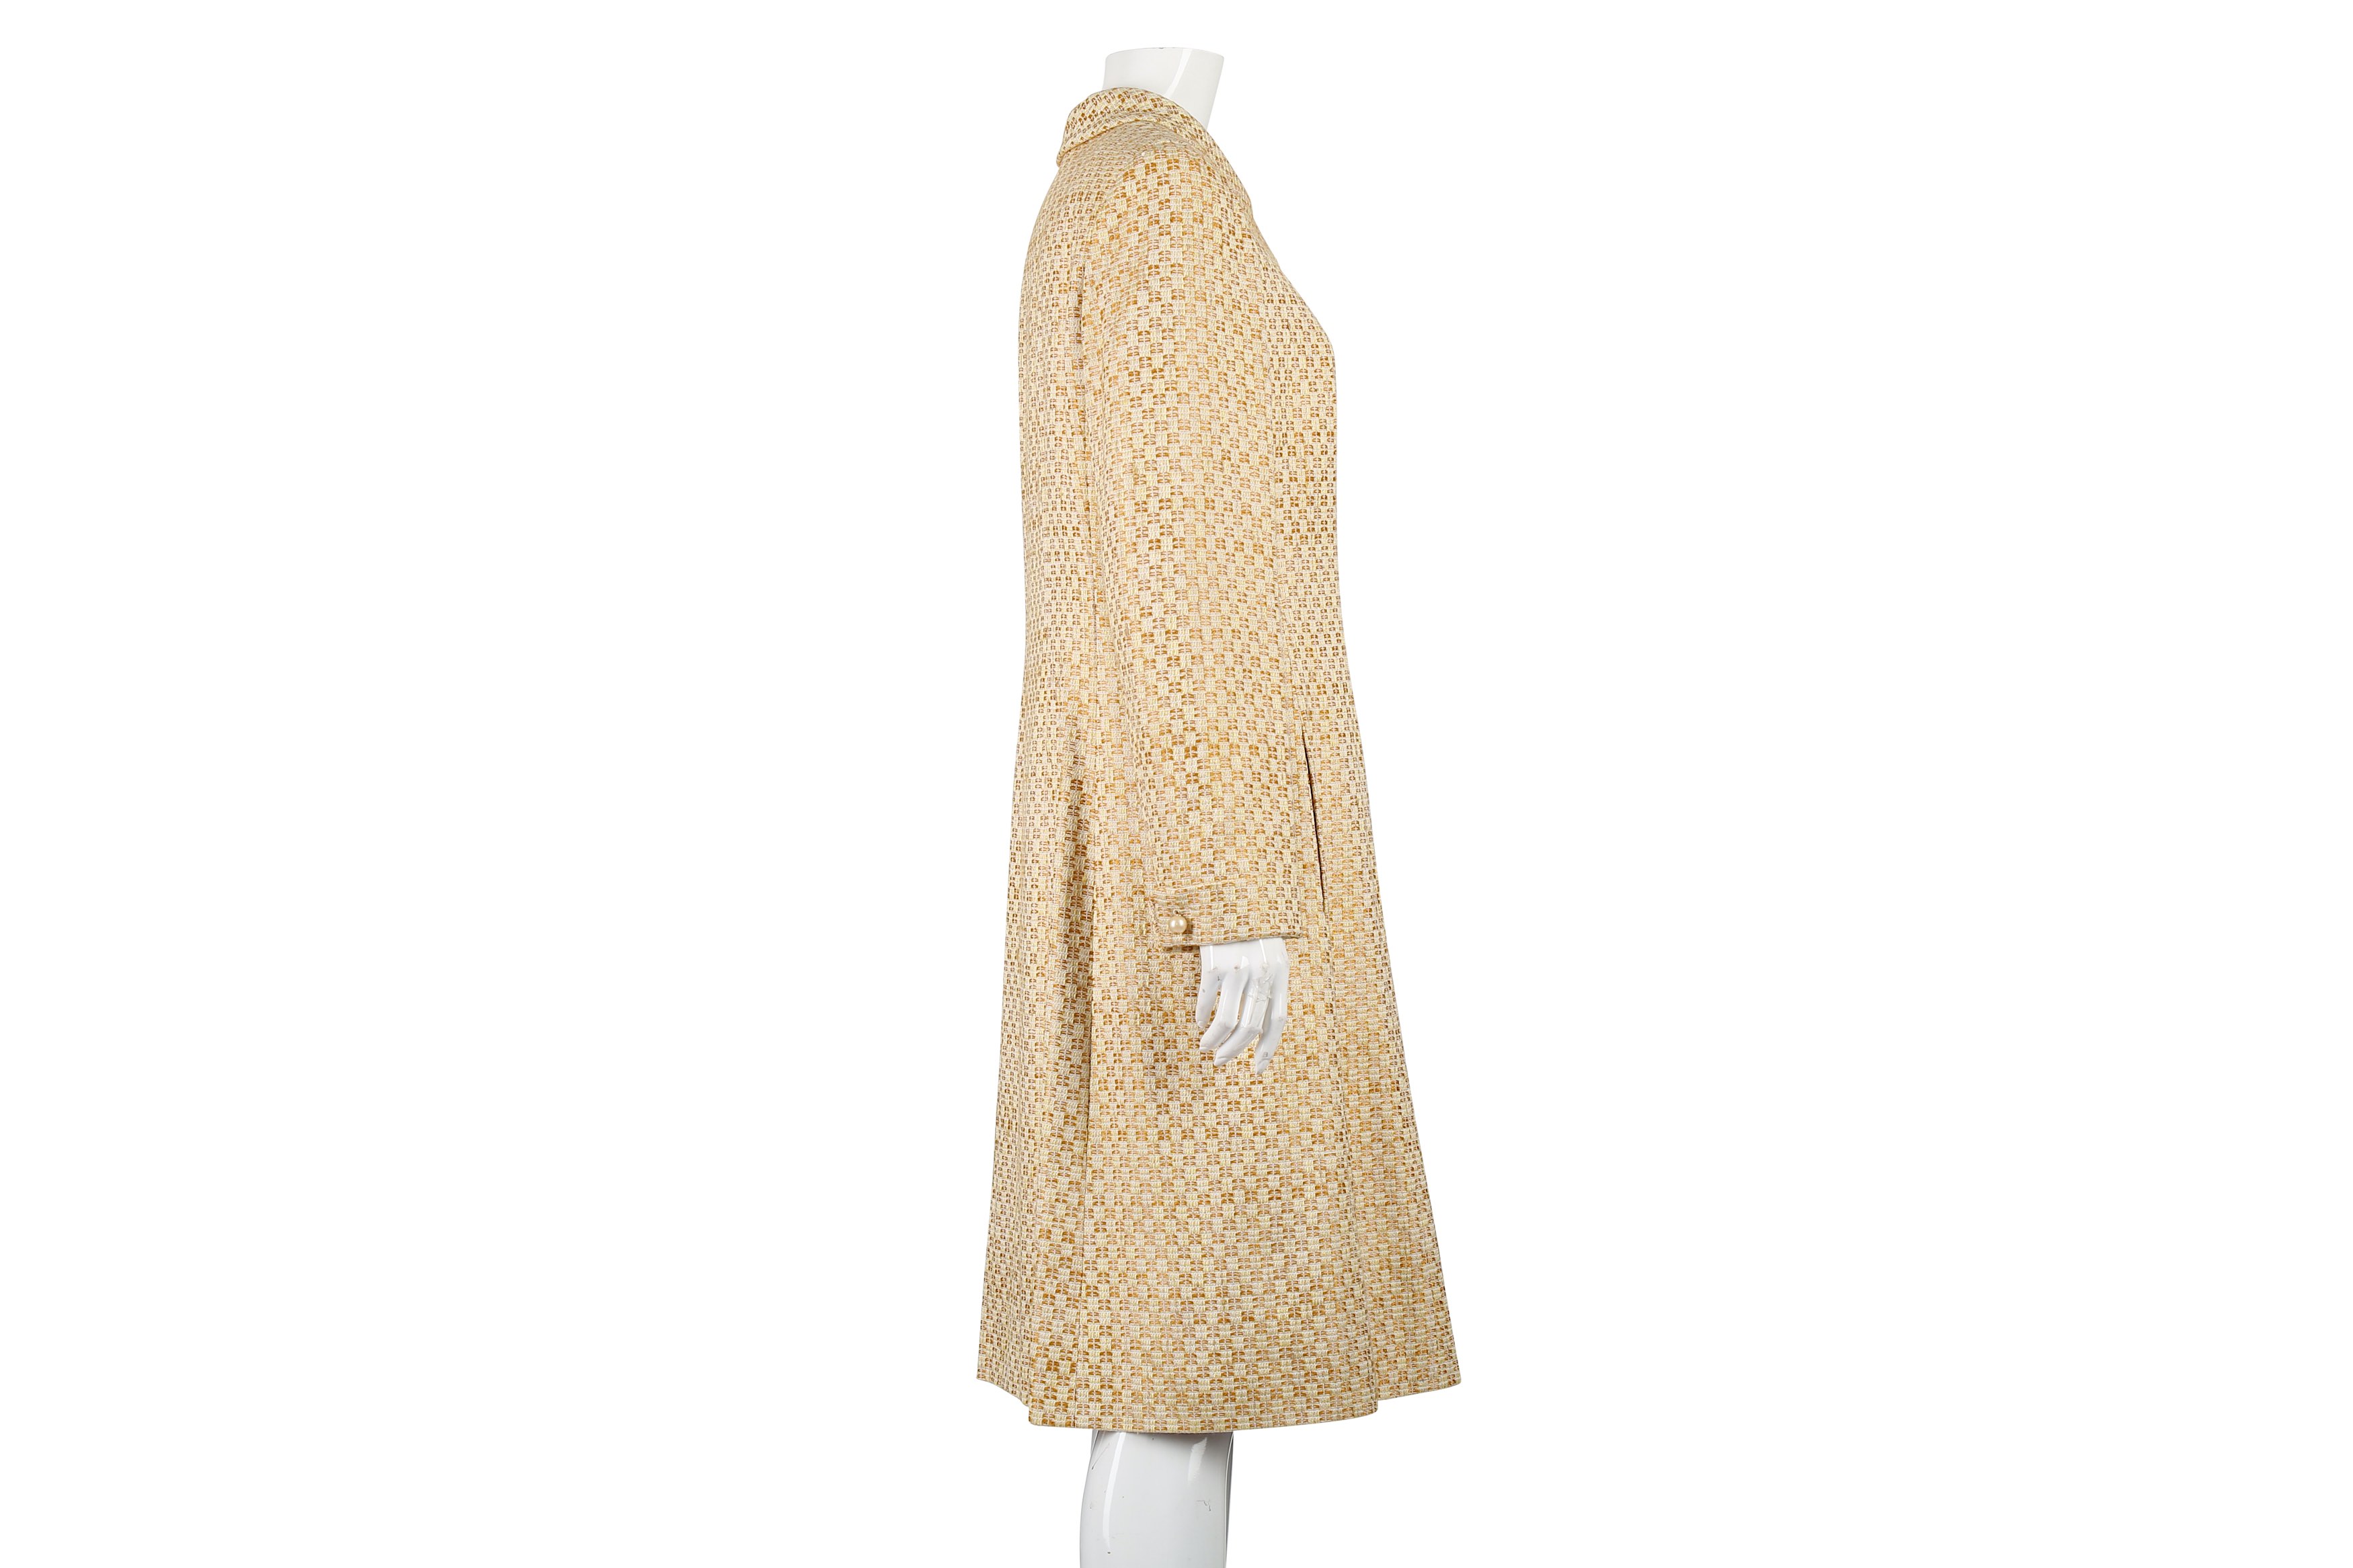 Chanel Honey Tweed Dress and Coat Suit - Size 42 - Image 3 of 8